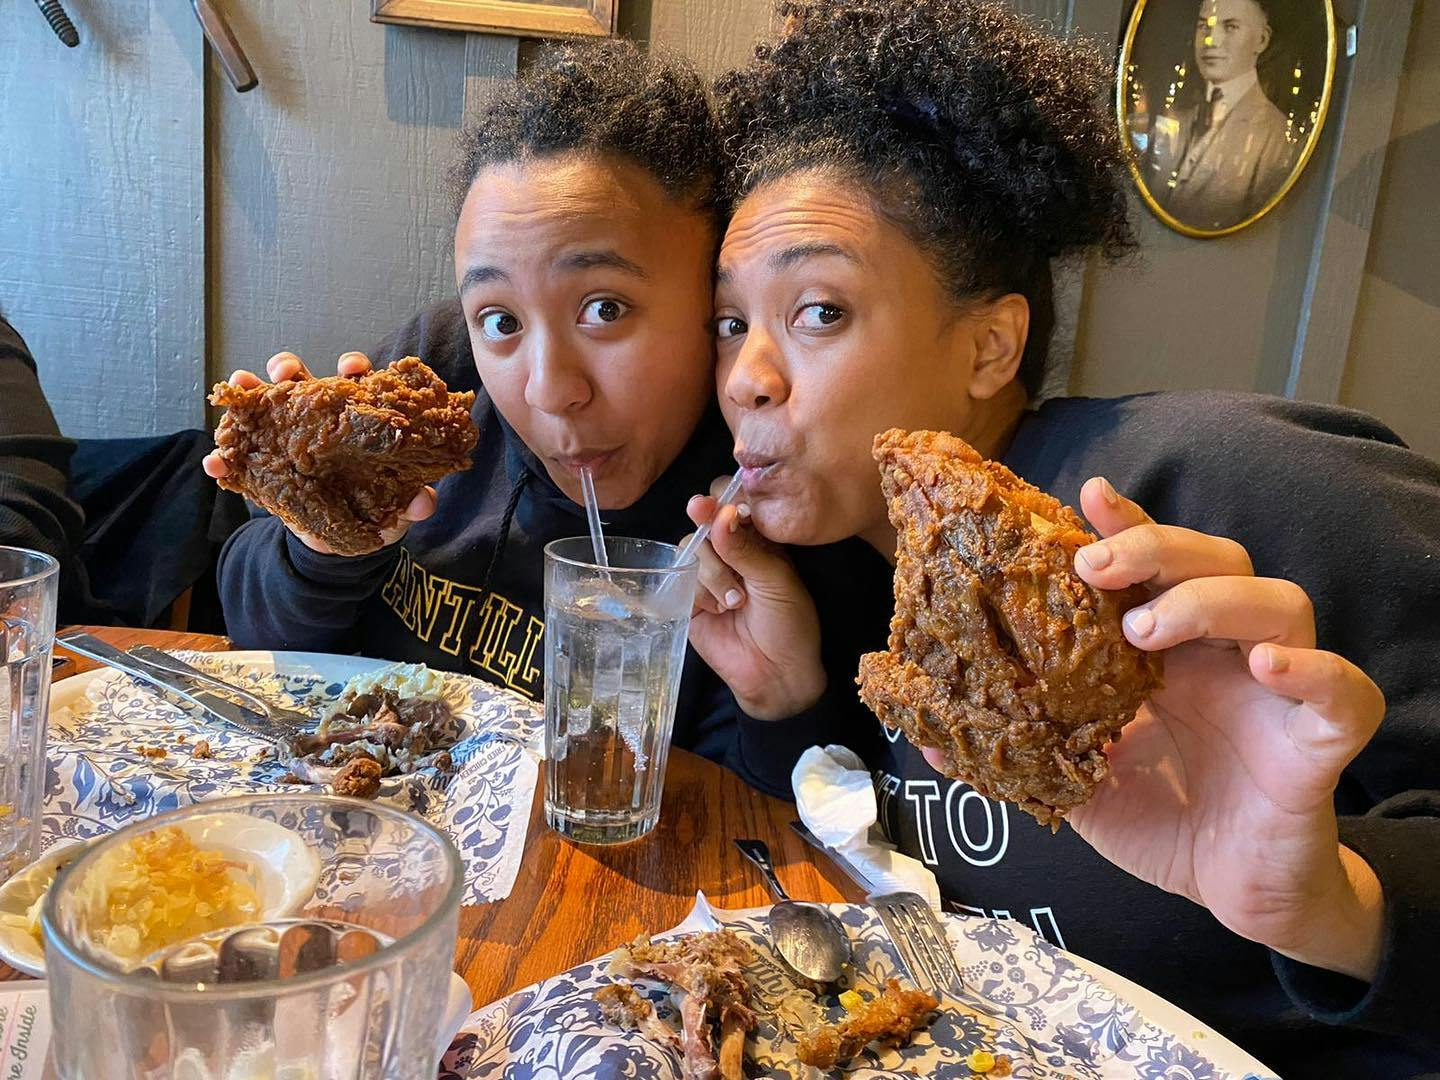 Two women sitting at a table in Cracker Barrel, drinking from the same cup with two different straws, holding up fried chicken.